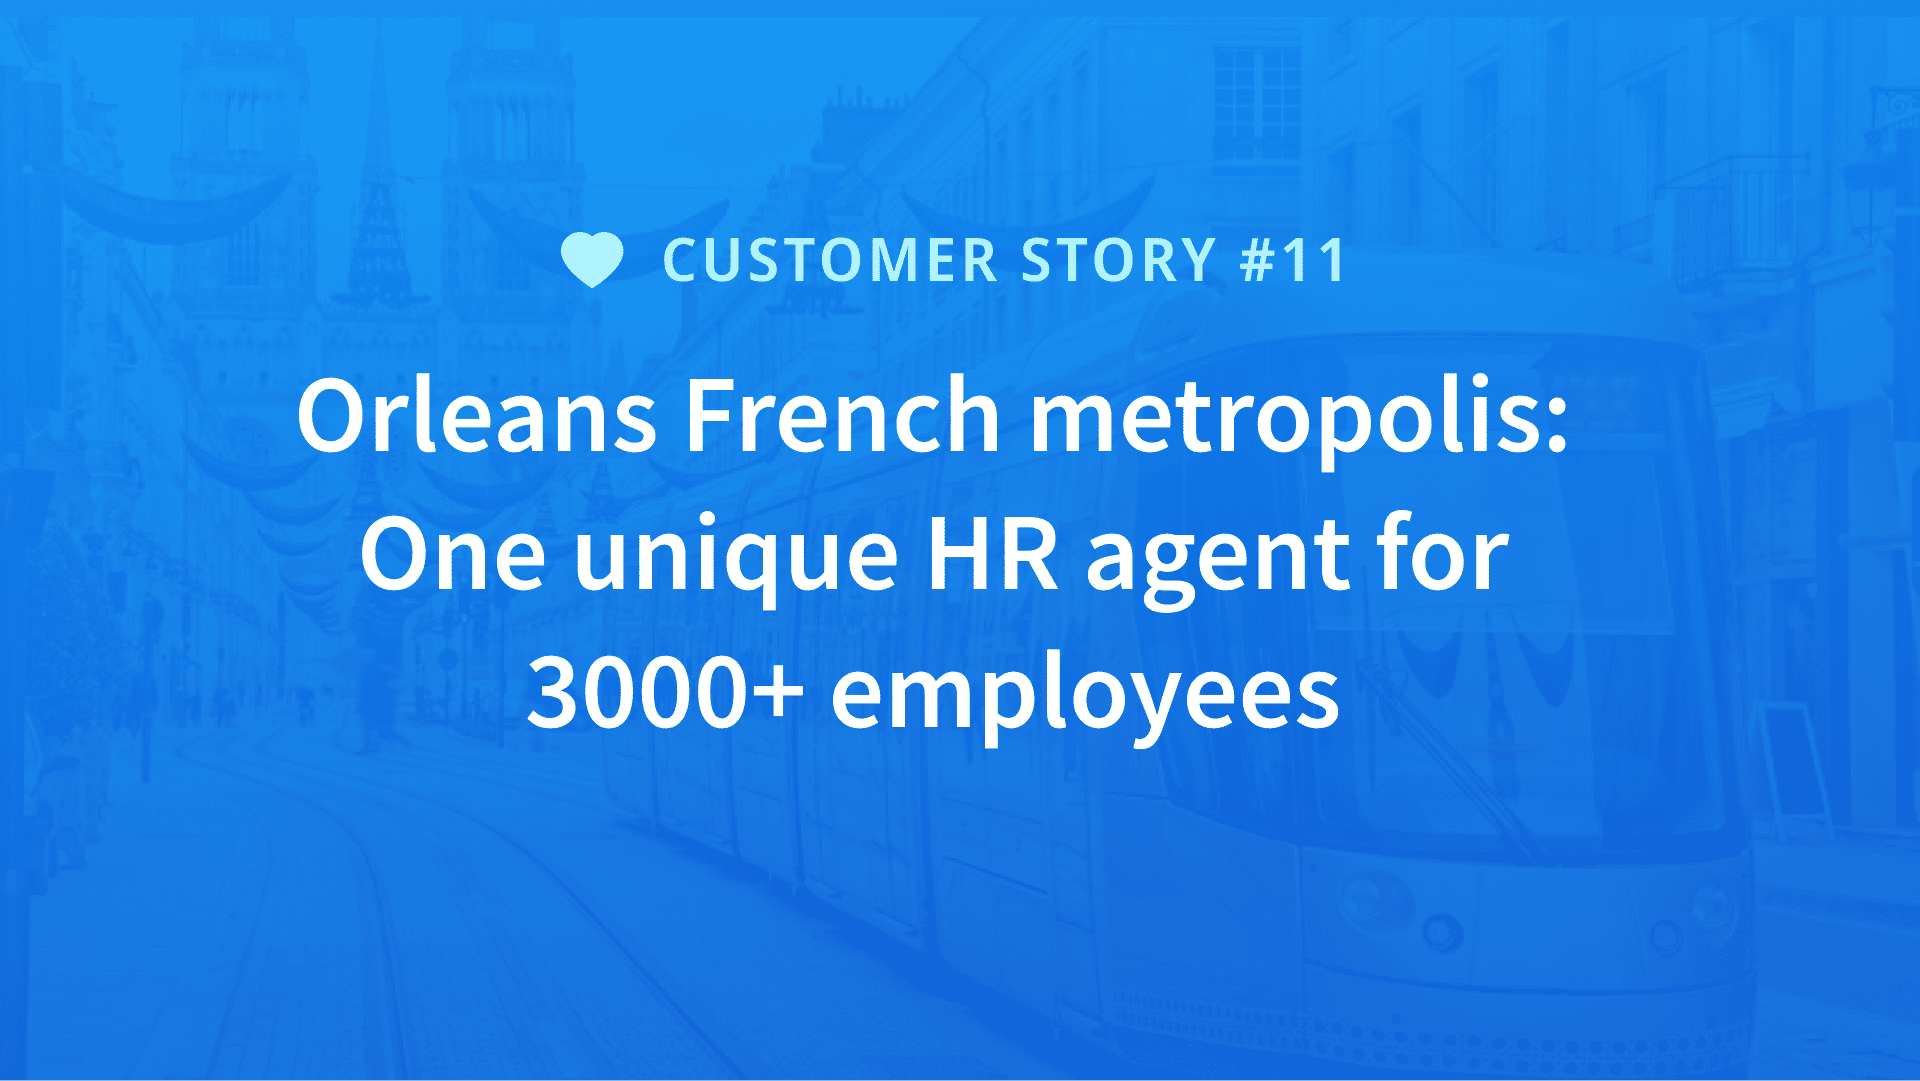 Orleans French metropolis: one unique HR agent for 3000+ employees